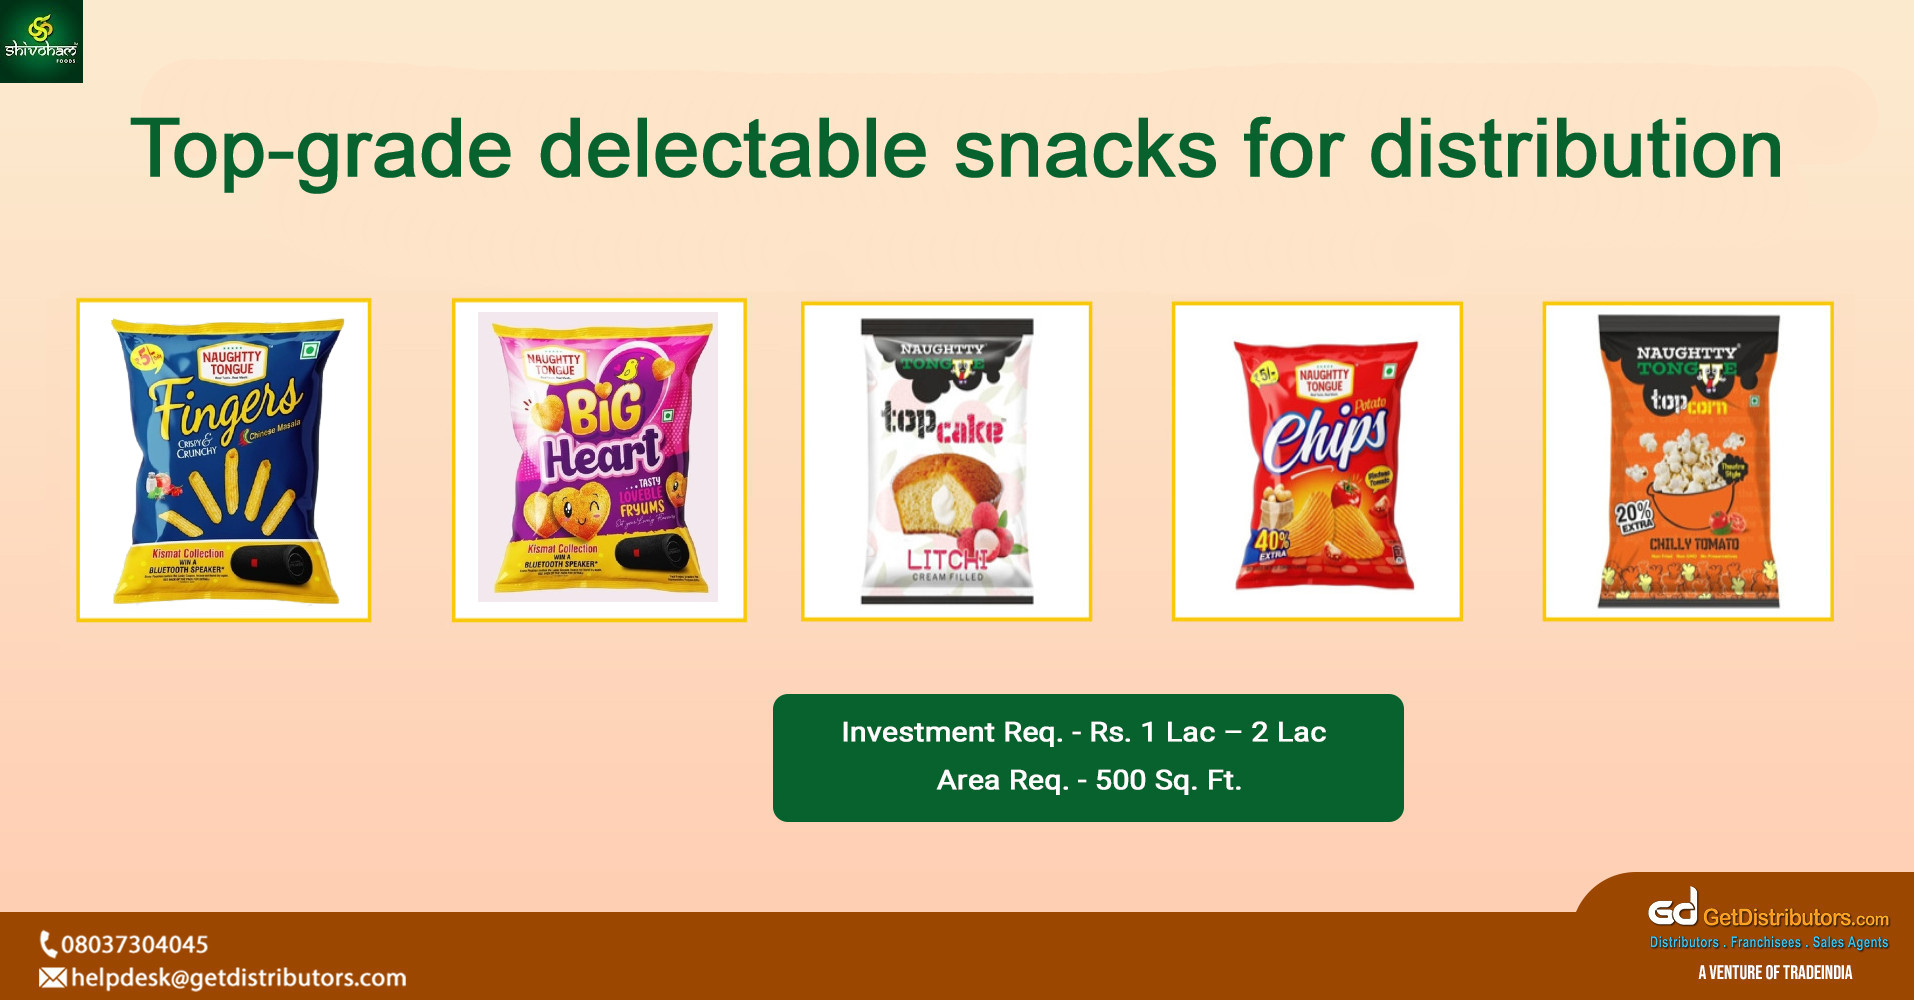 Top-grade delectable snacks for distribution